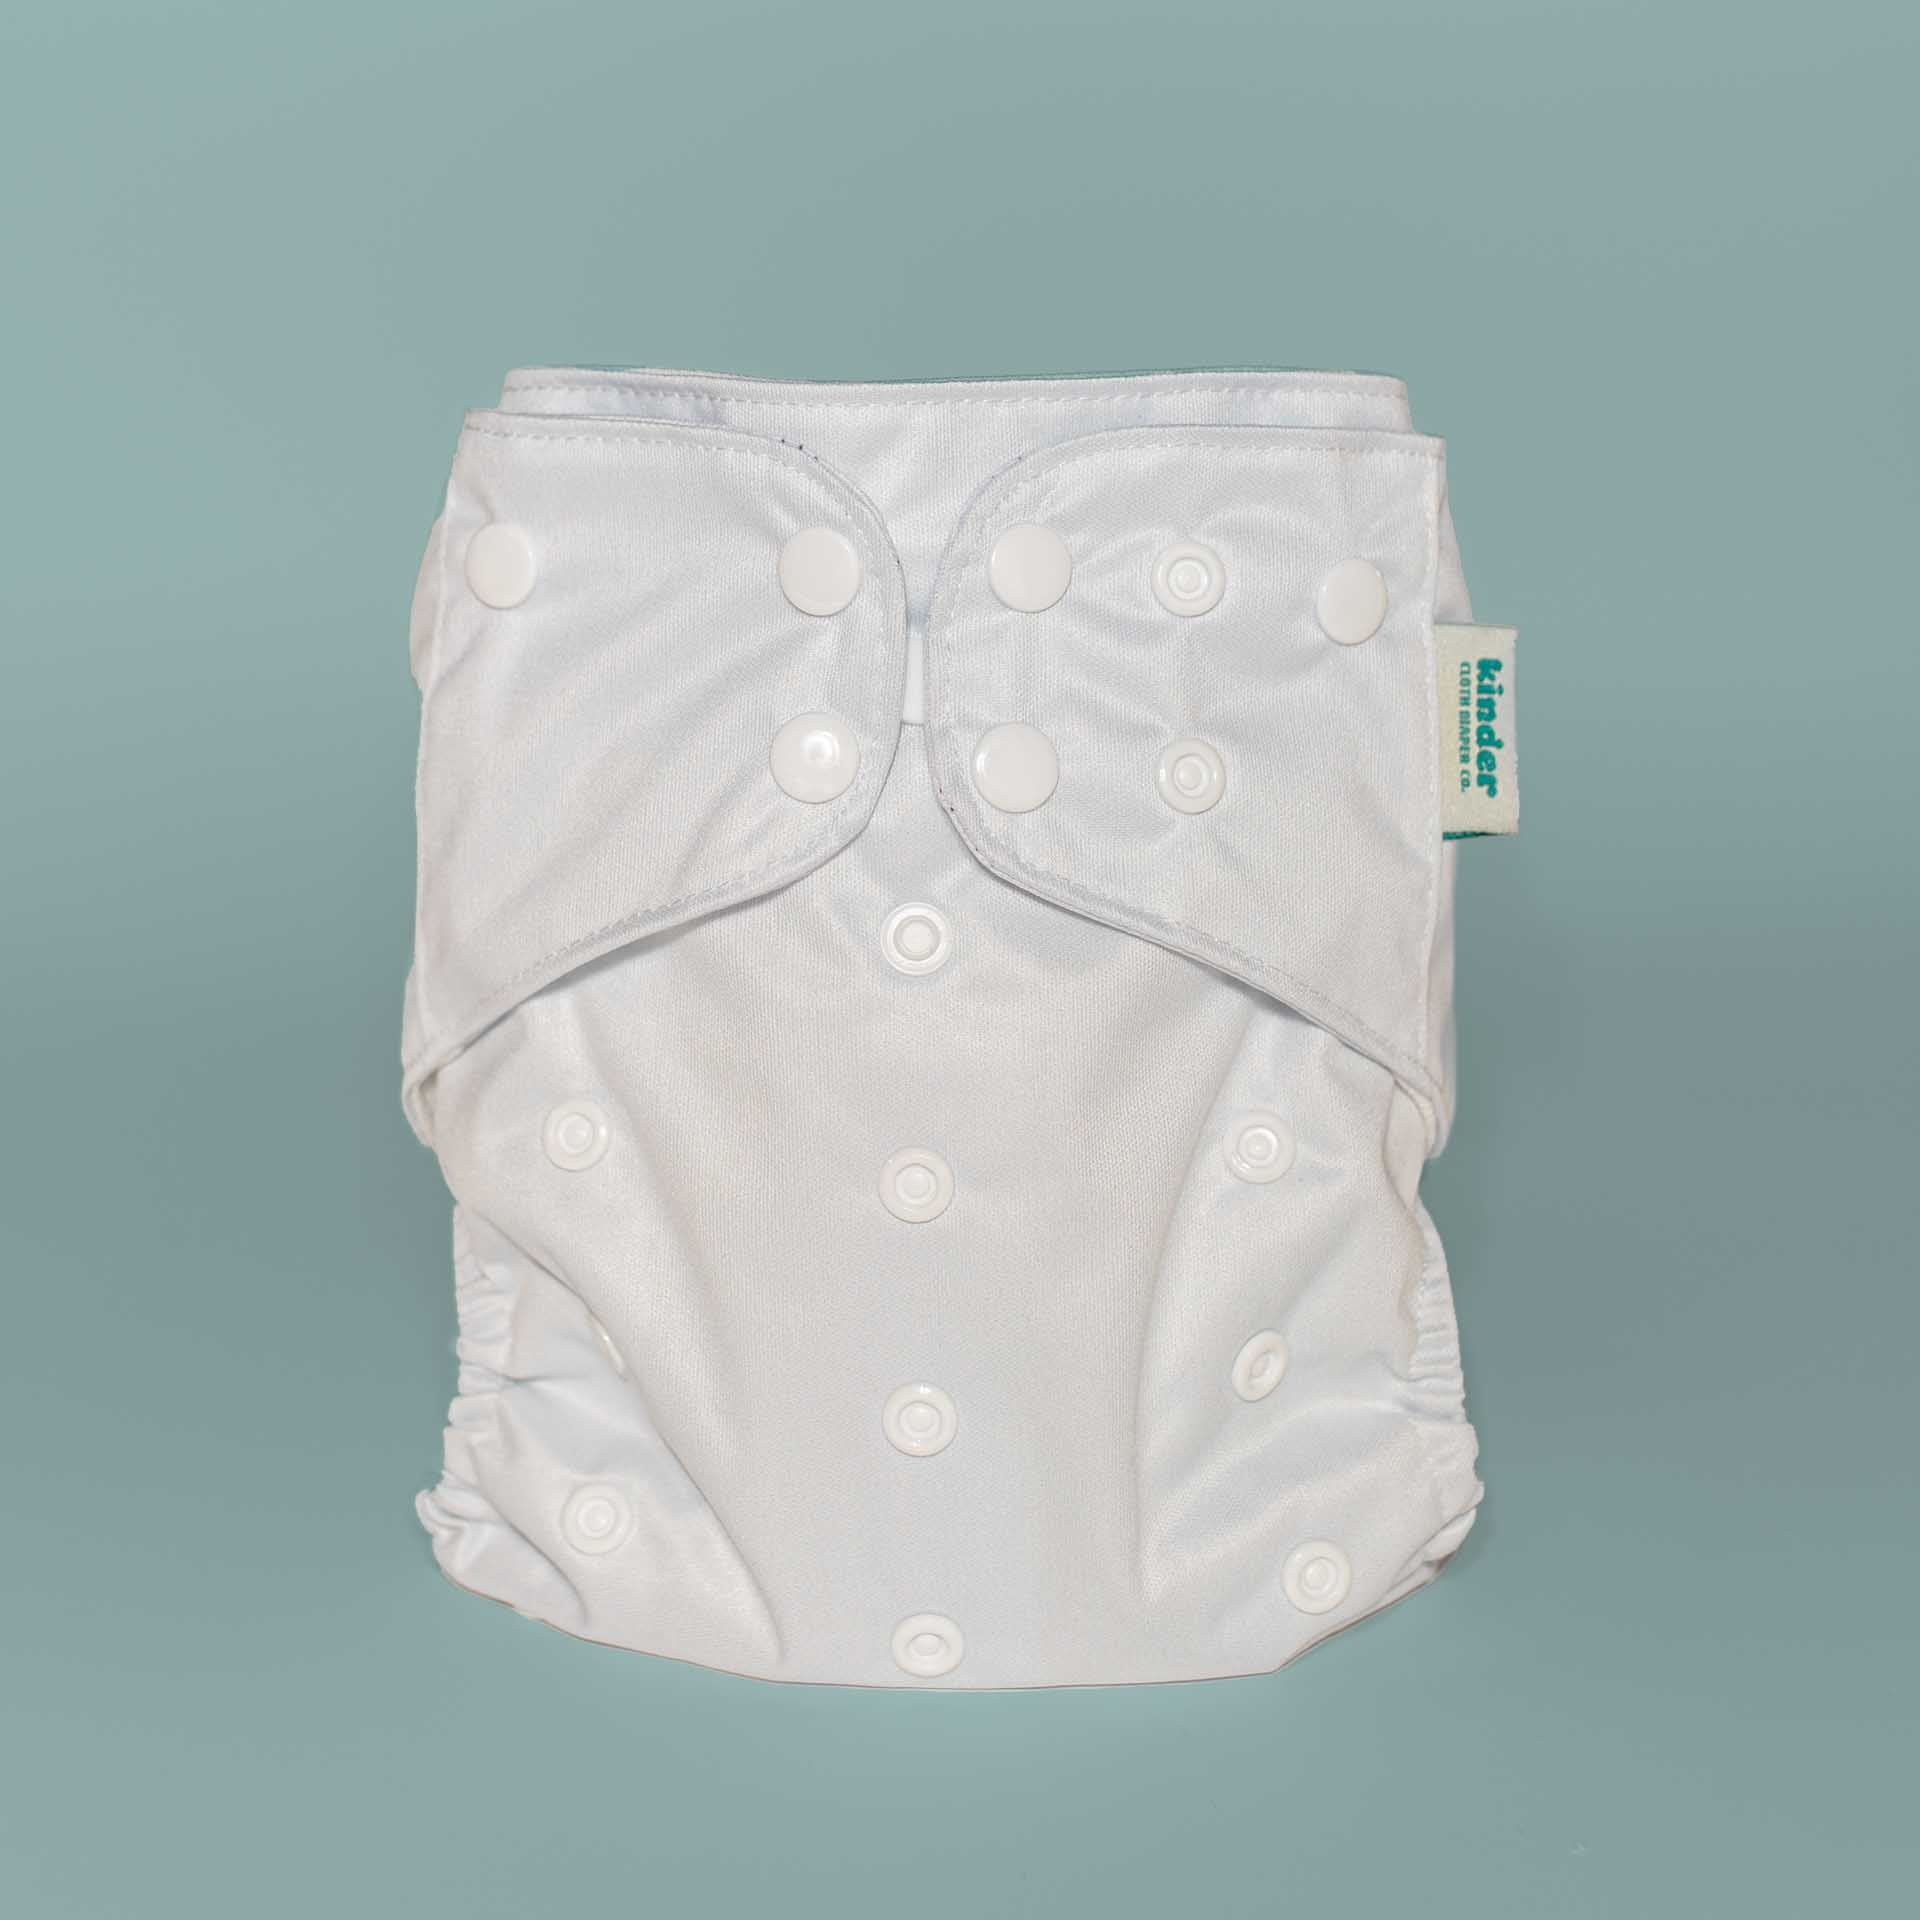 save money and use reusable cloth diapers make cloth mainstream white cloth diaper washing reusable diapers basic save money on diapers kinder